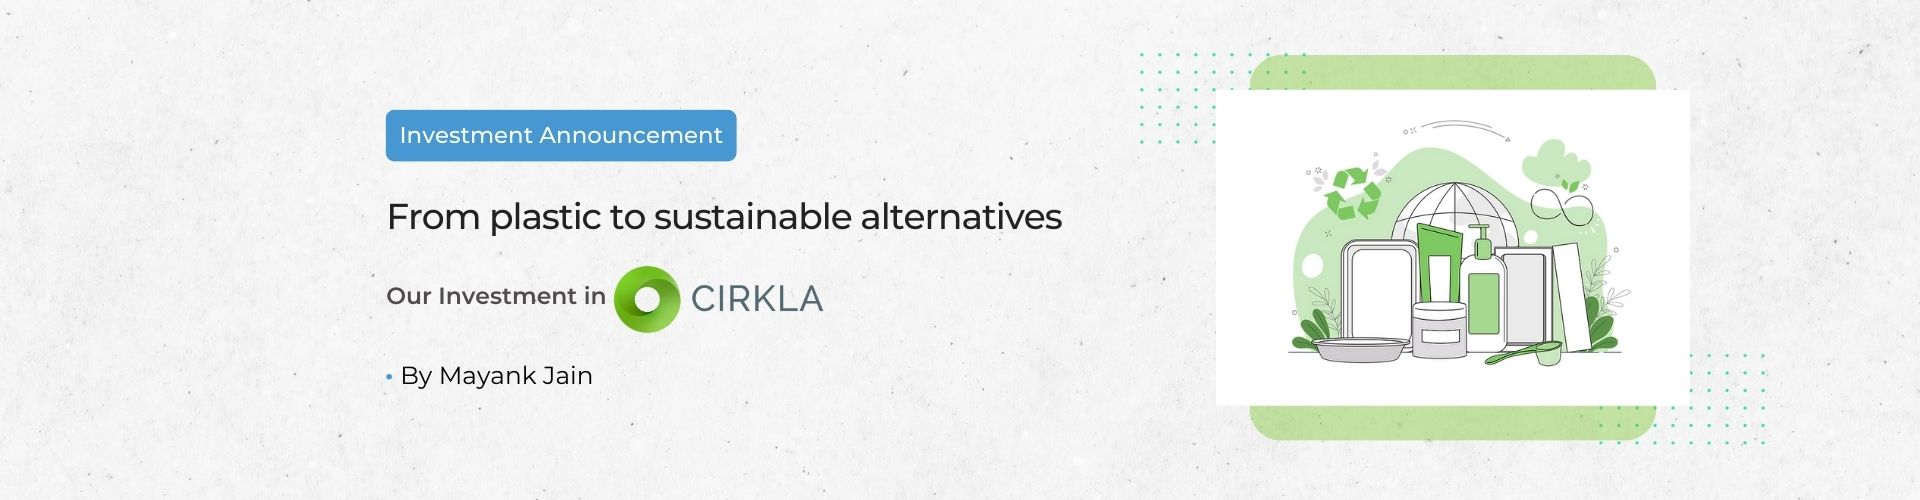 From plastic to sustainable alternatives: Our investment in Cirkla